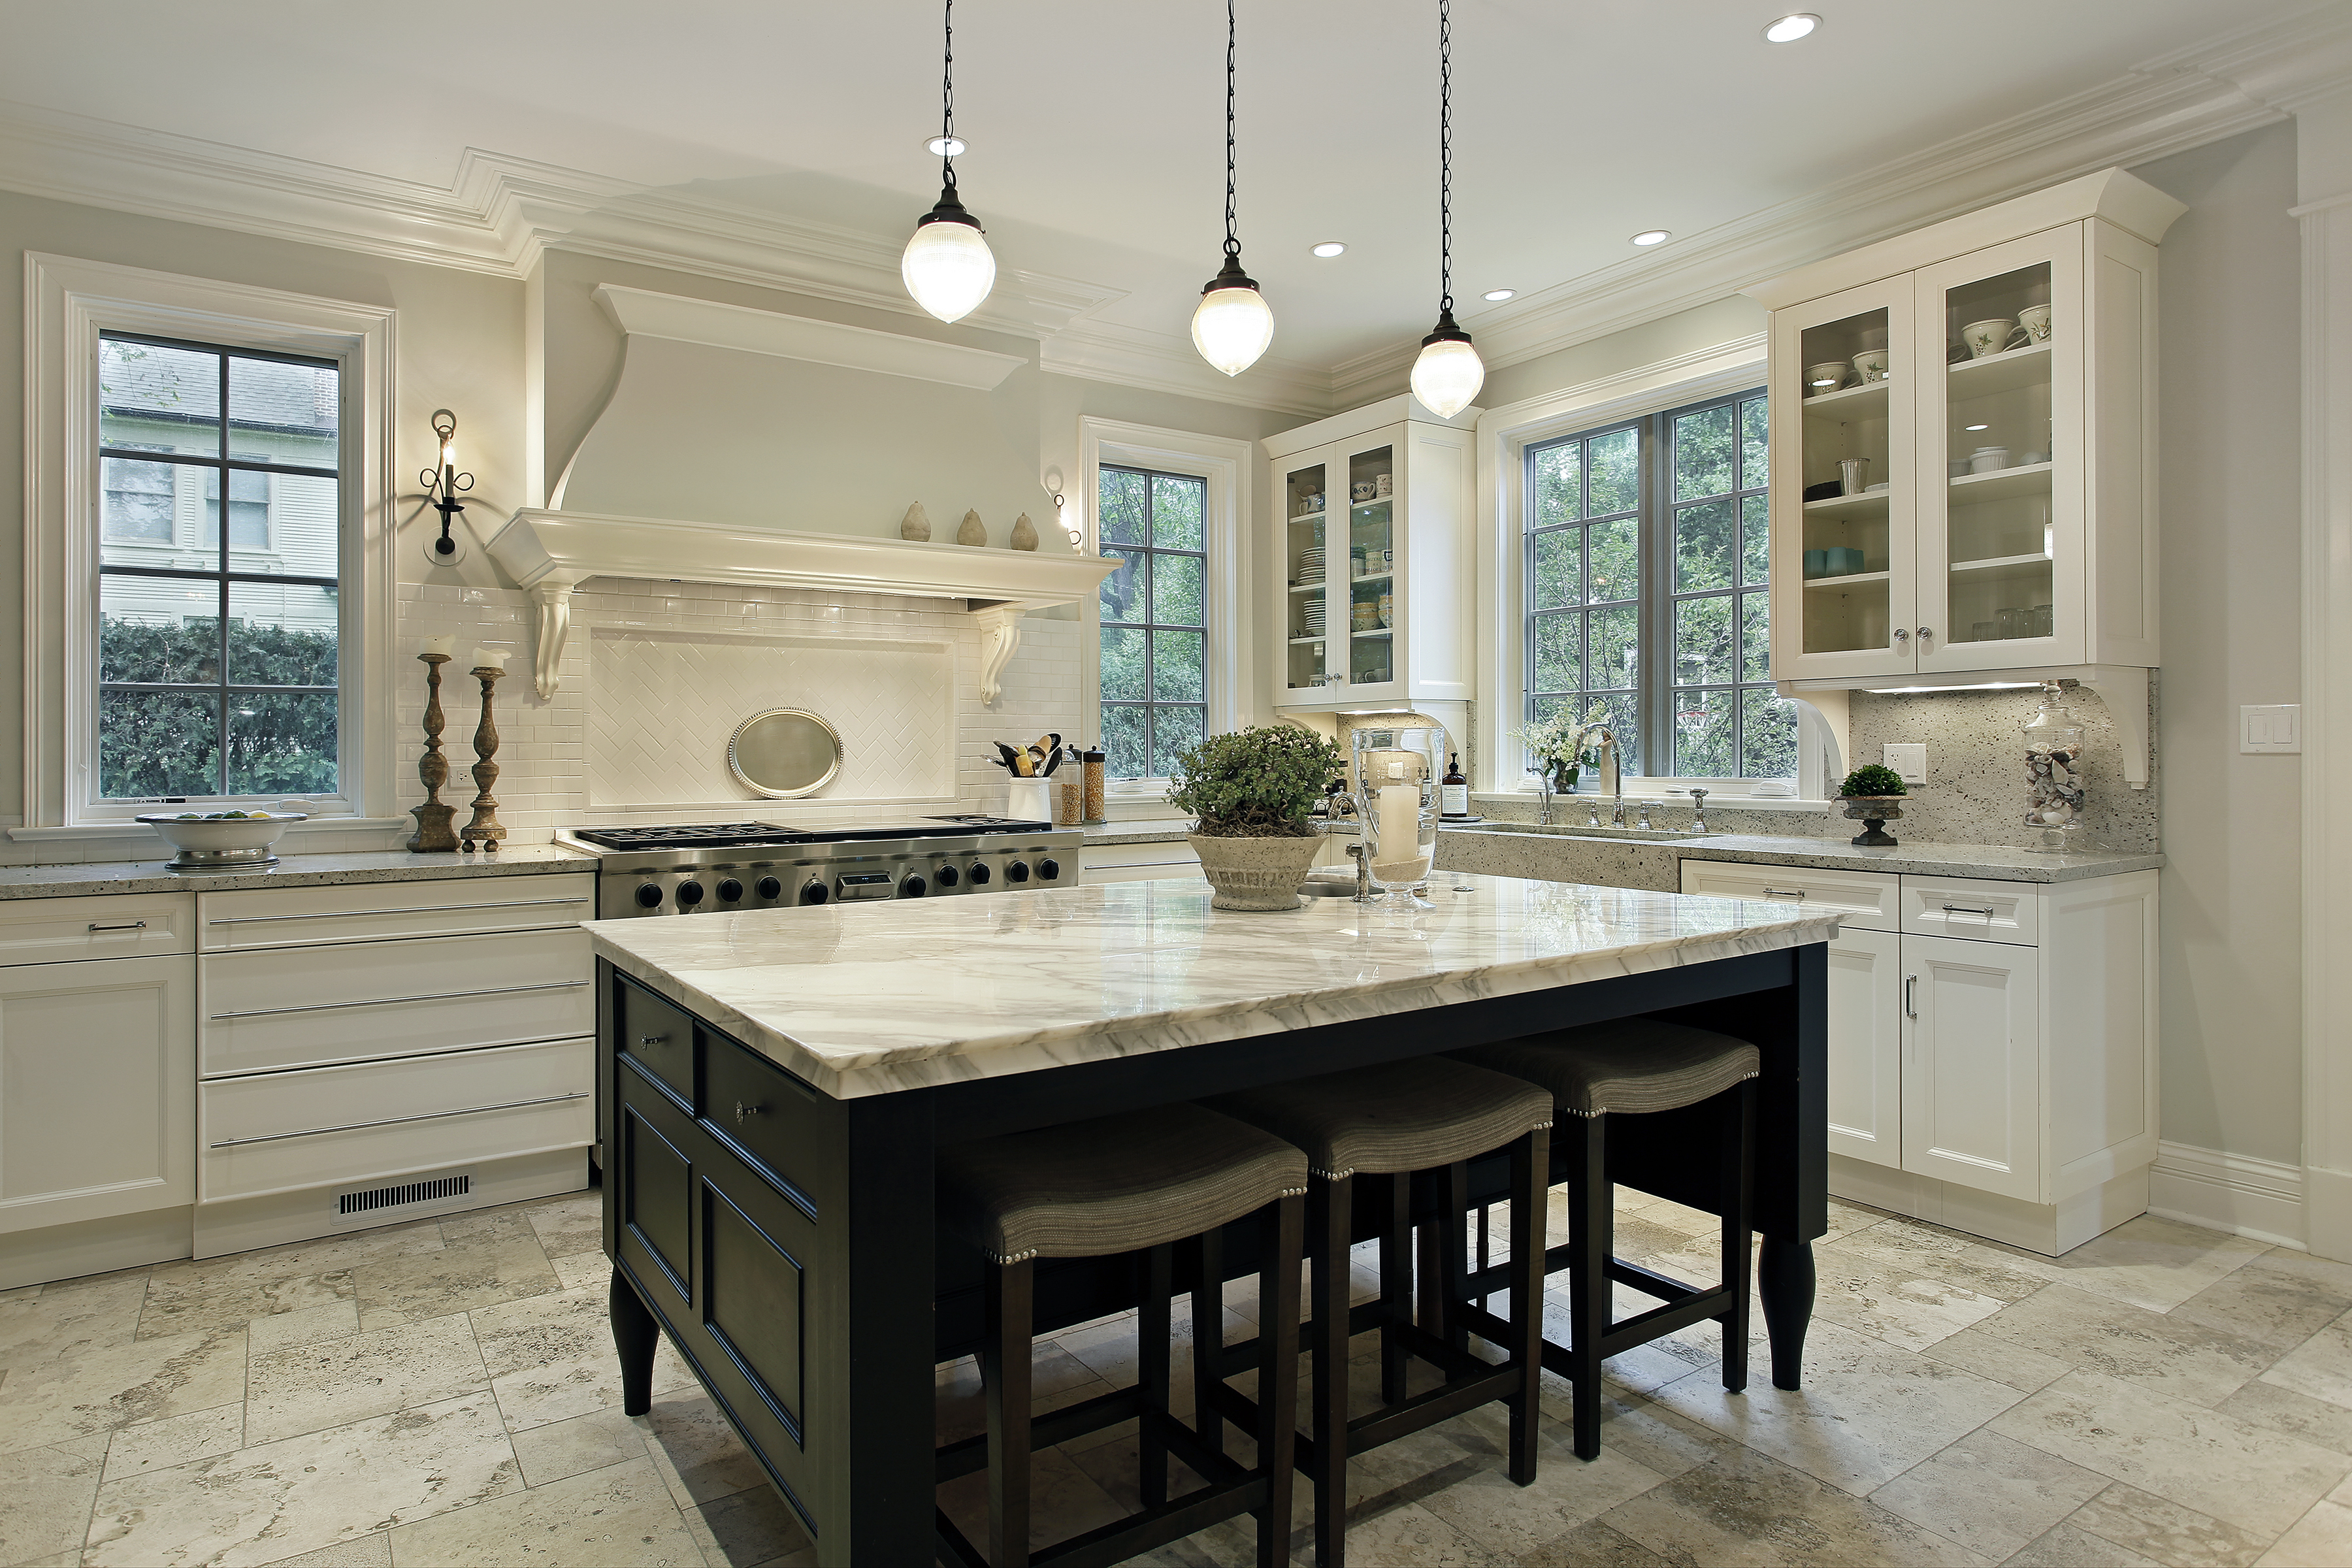 Kitchen Elements and Materials - Chicago Kitchen Remodeling